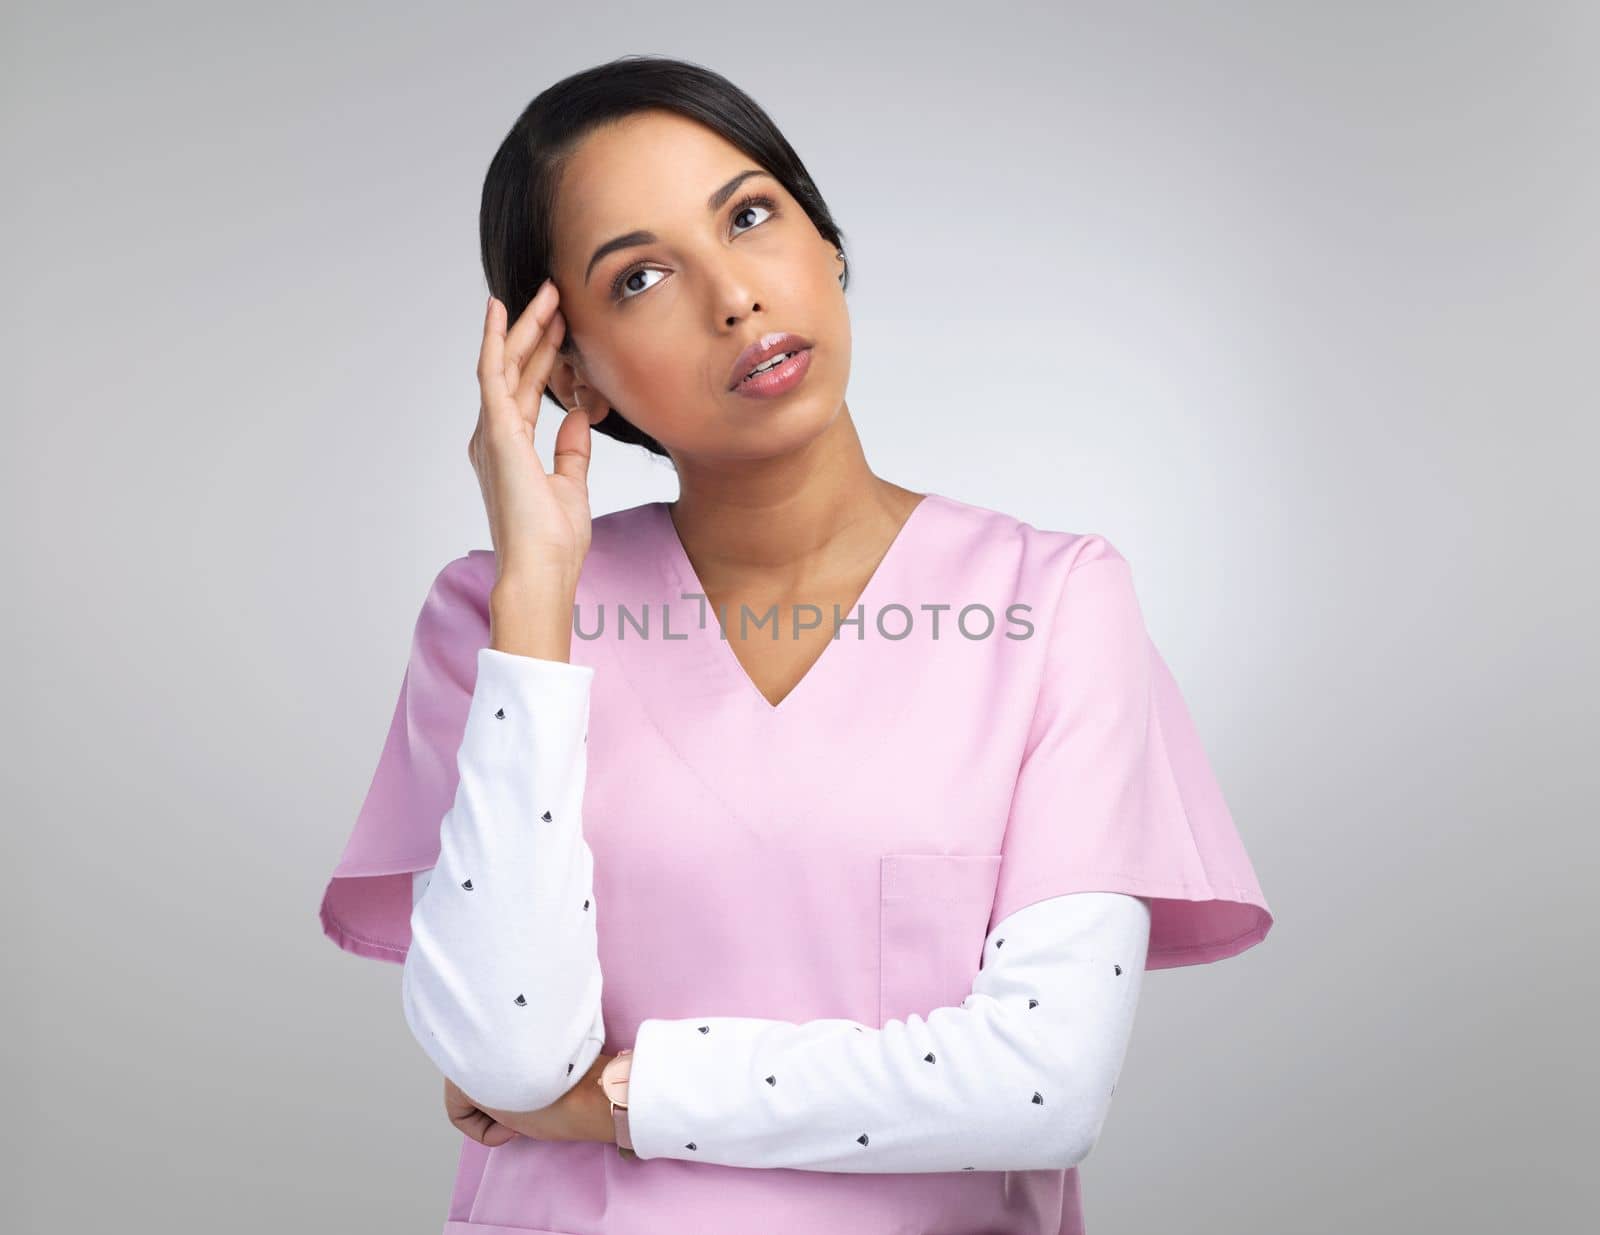 Being a doctor comes with its own stresses. an attractive young female healthcare worker looking stressed while standing in studio against a grey background